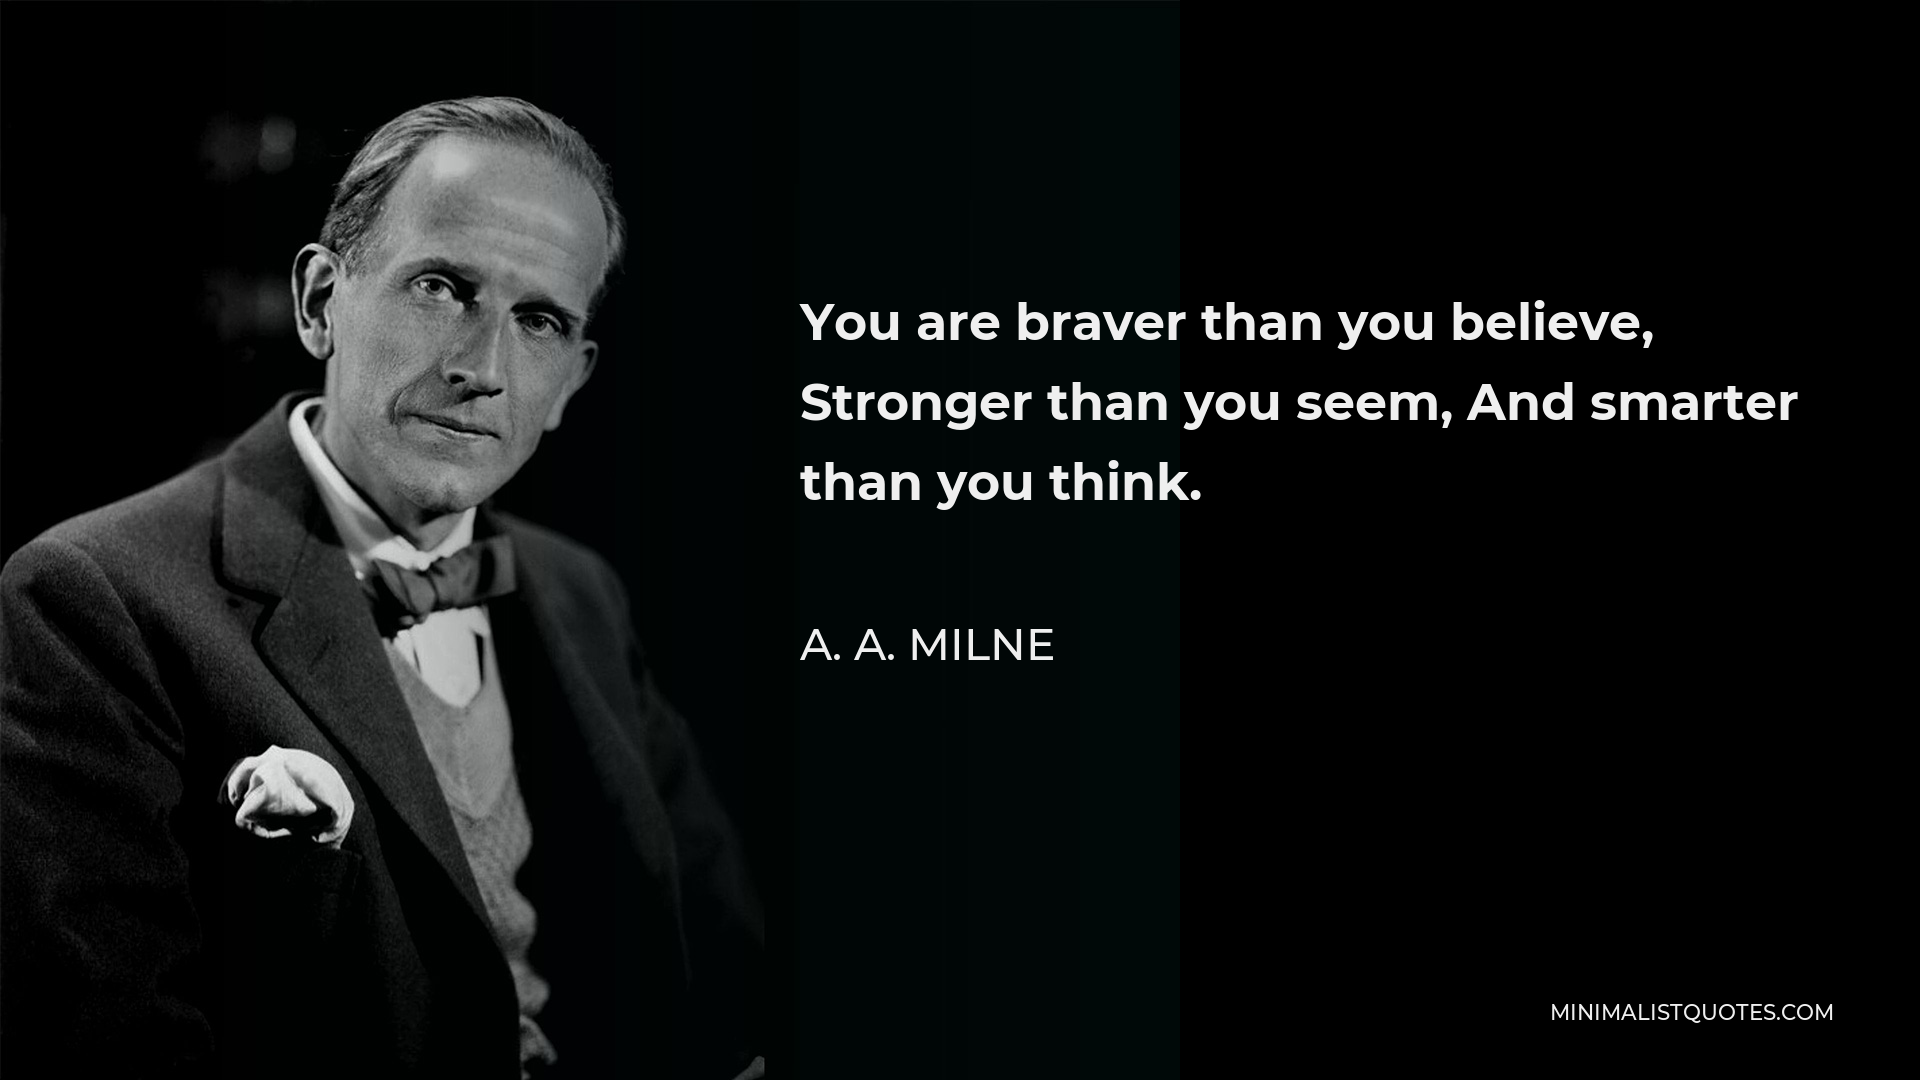 A. A. Milne Quote - You are braver than you believe, Stronger than you seem, And smarter than you think.